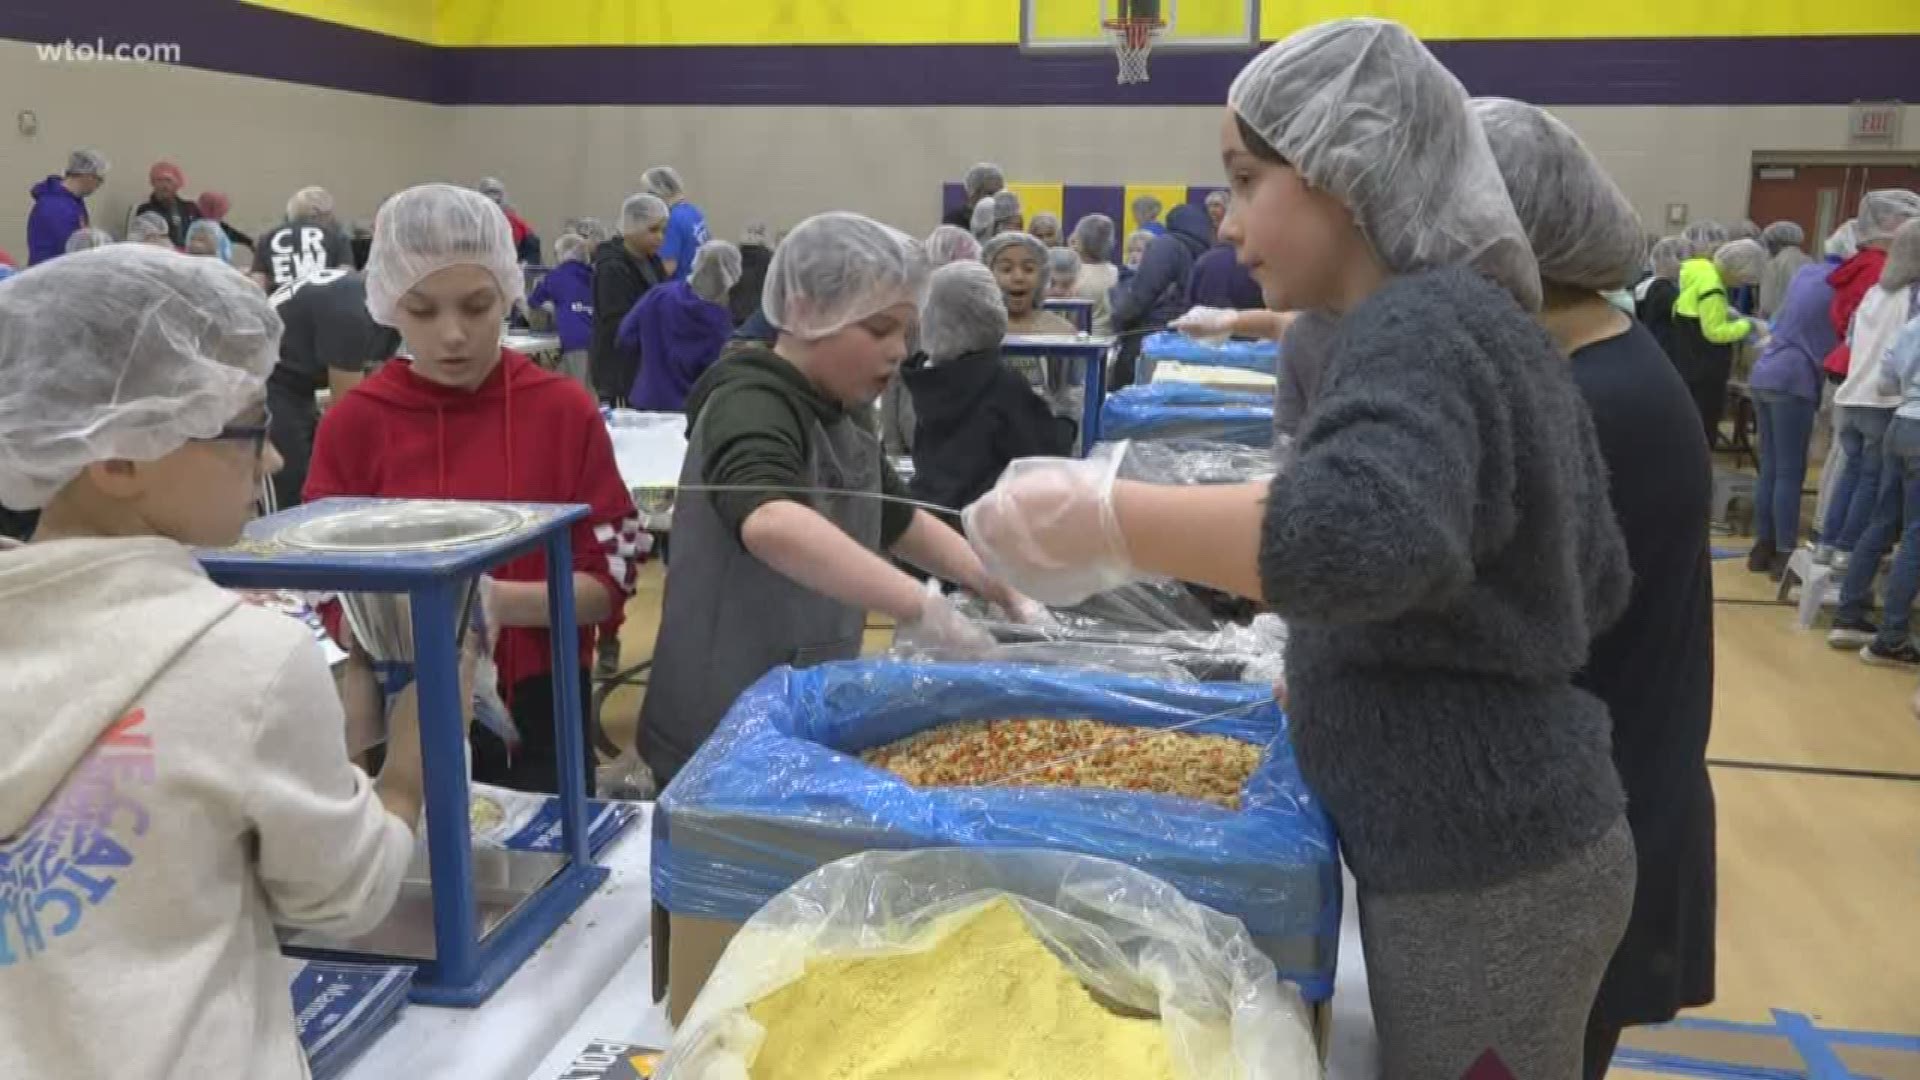 Students at Wayne Trail Elementary School, taking a break from the usual learning, to pack thousands of meals for starving children